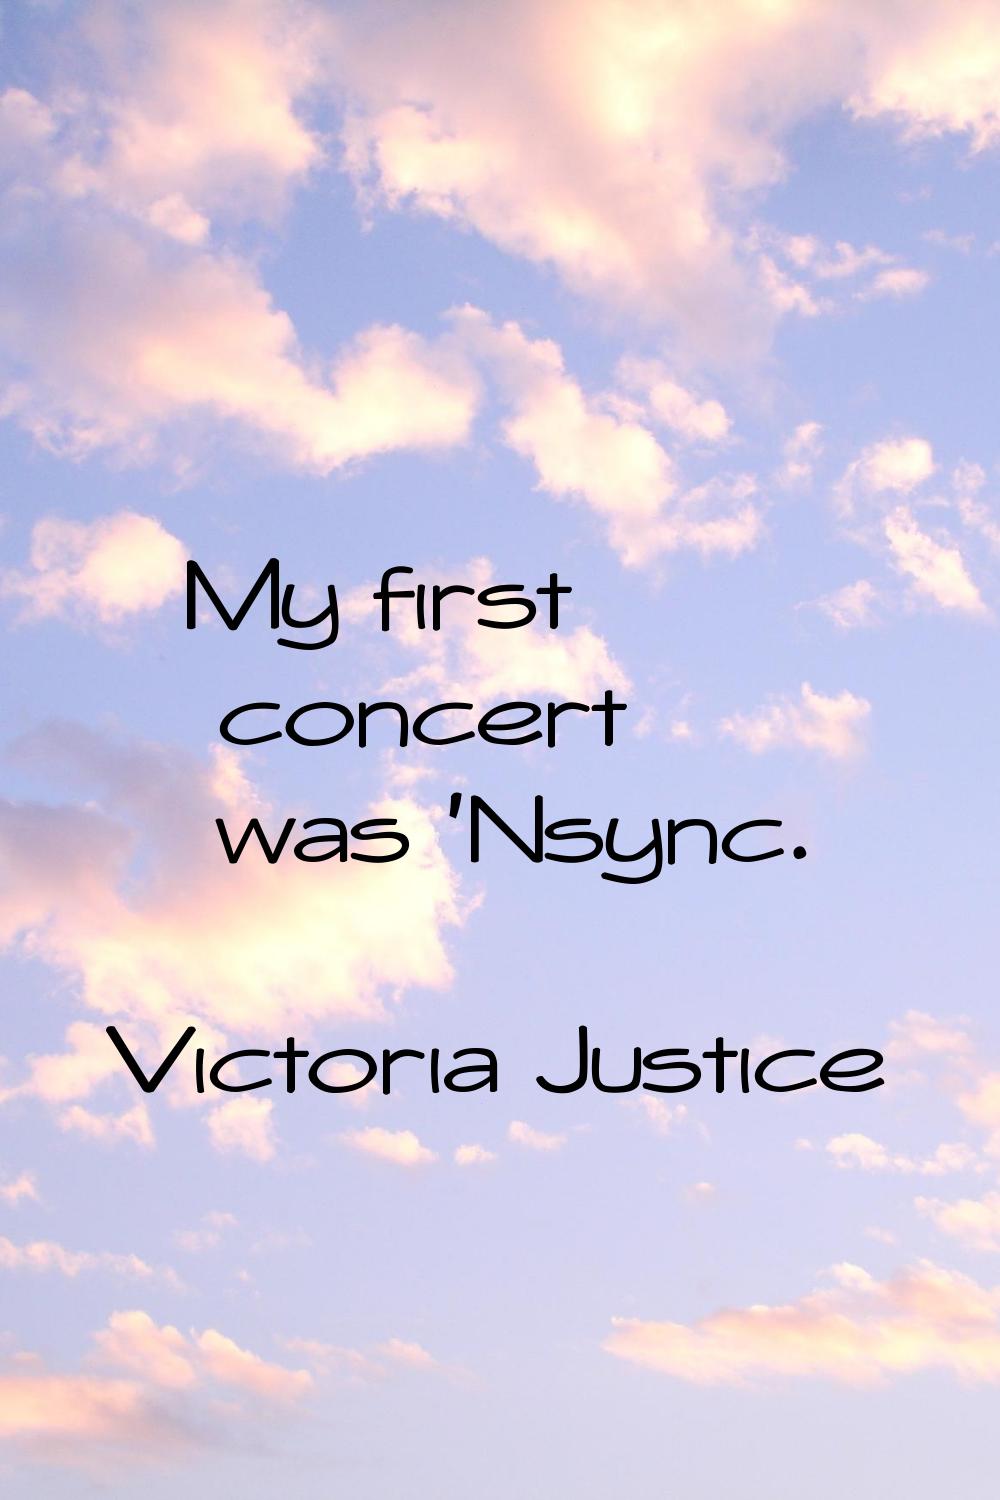 My first concert was 'Nsync.